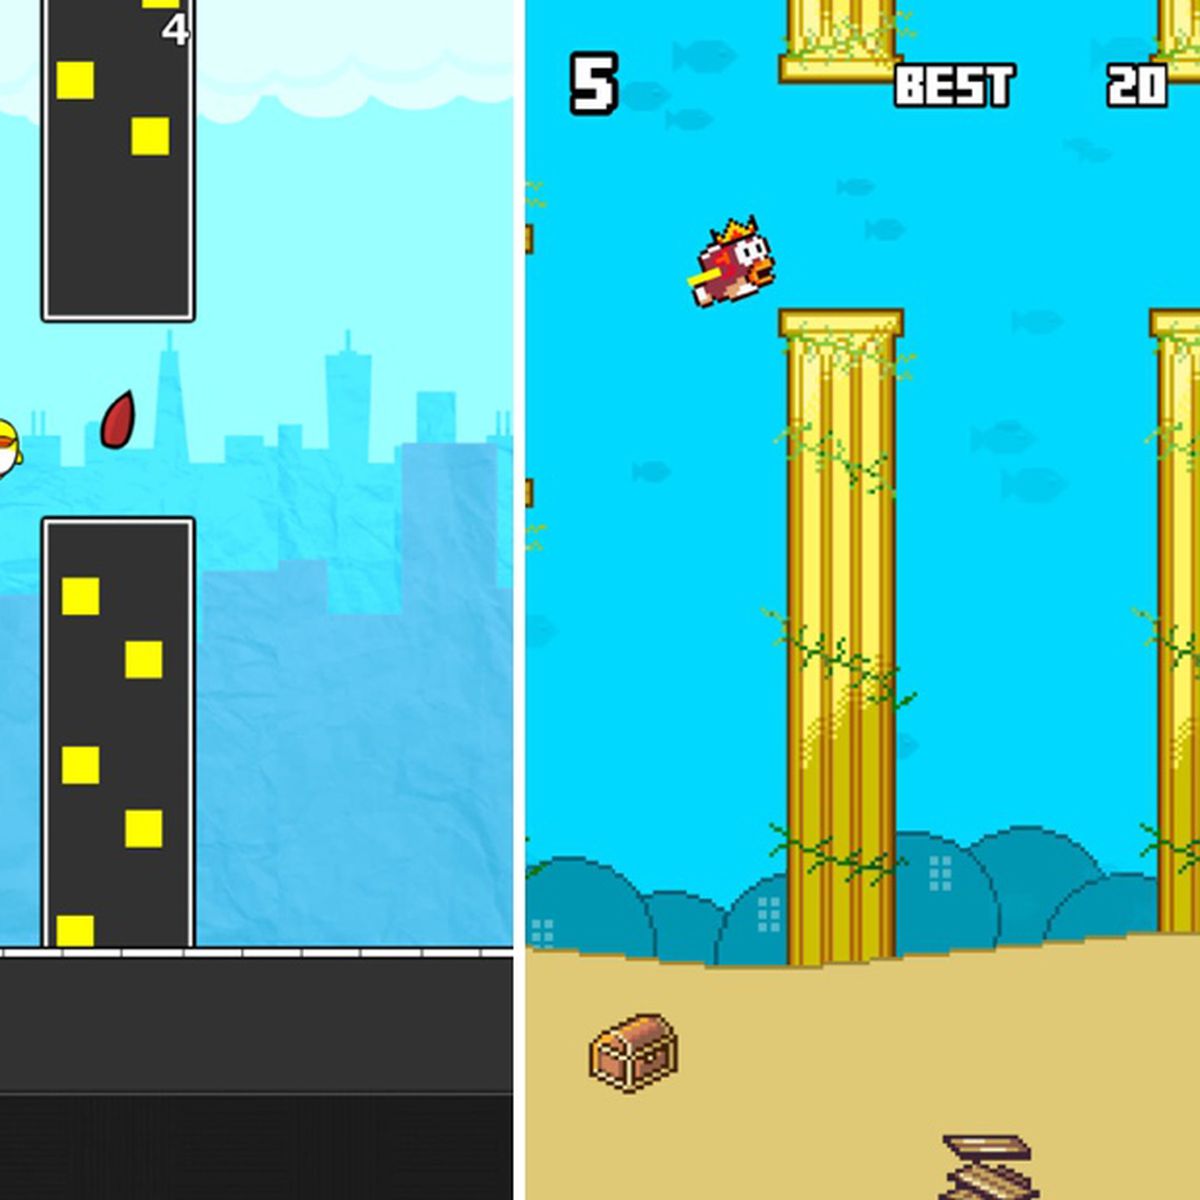 Flappy Bird Review - IGN